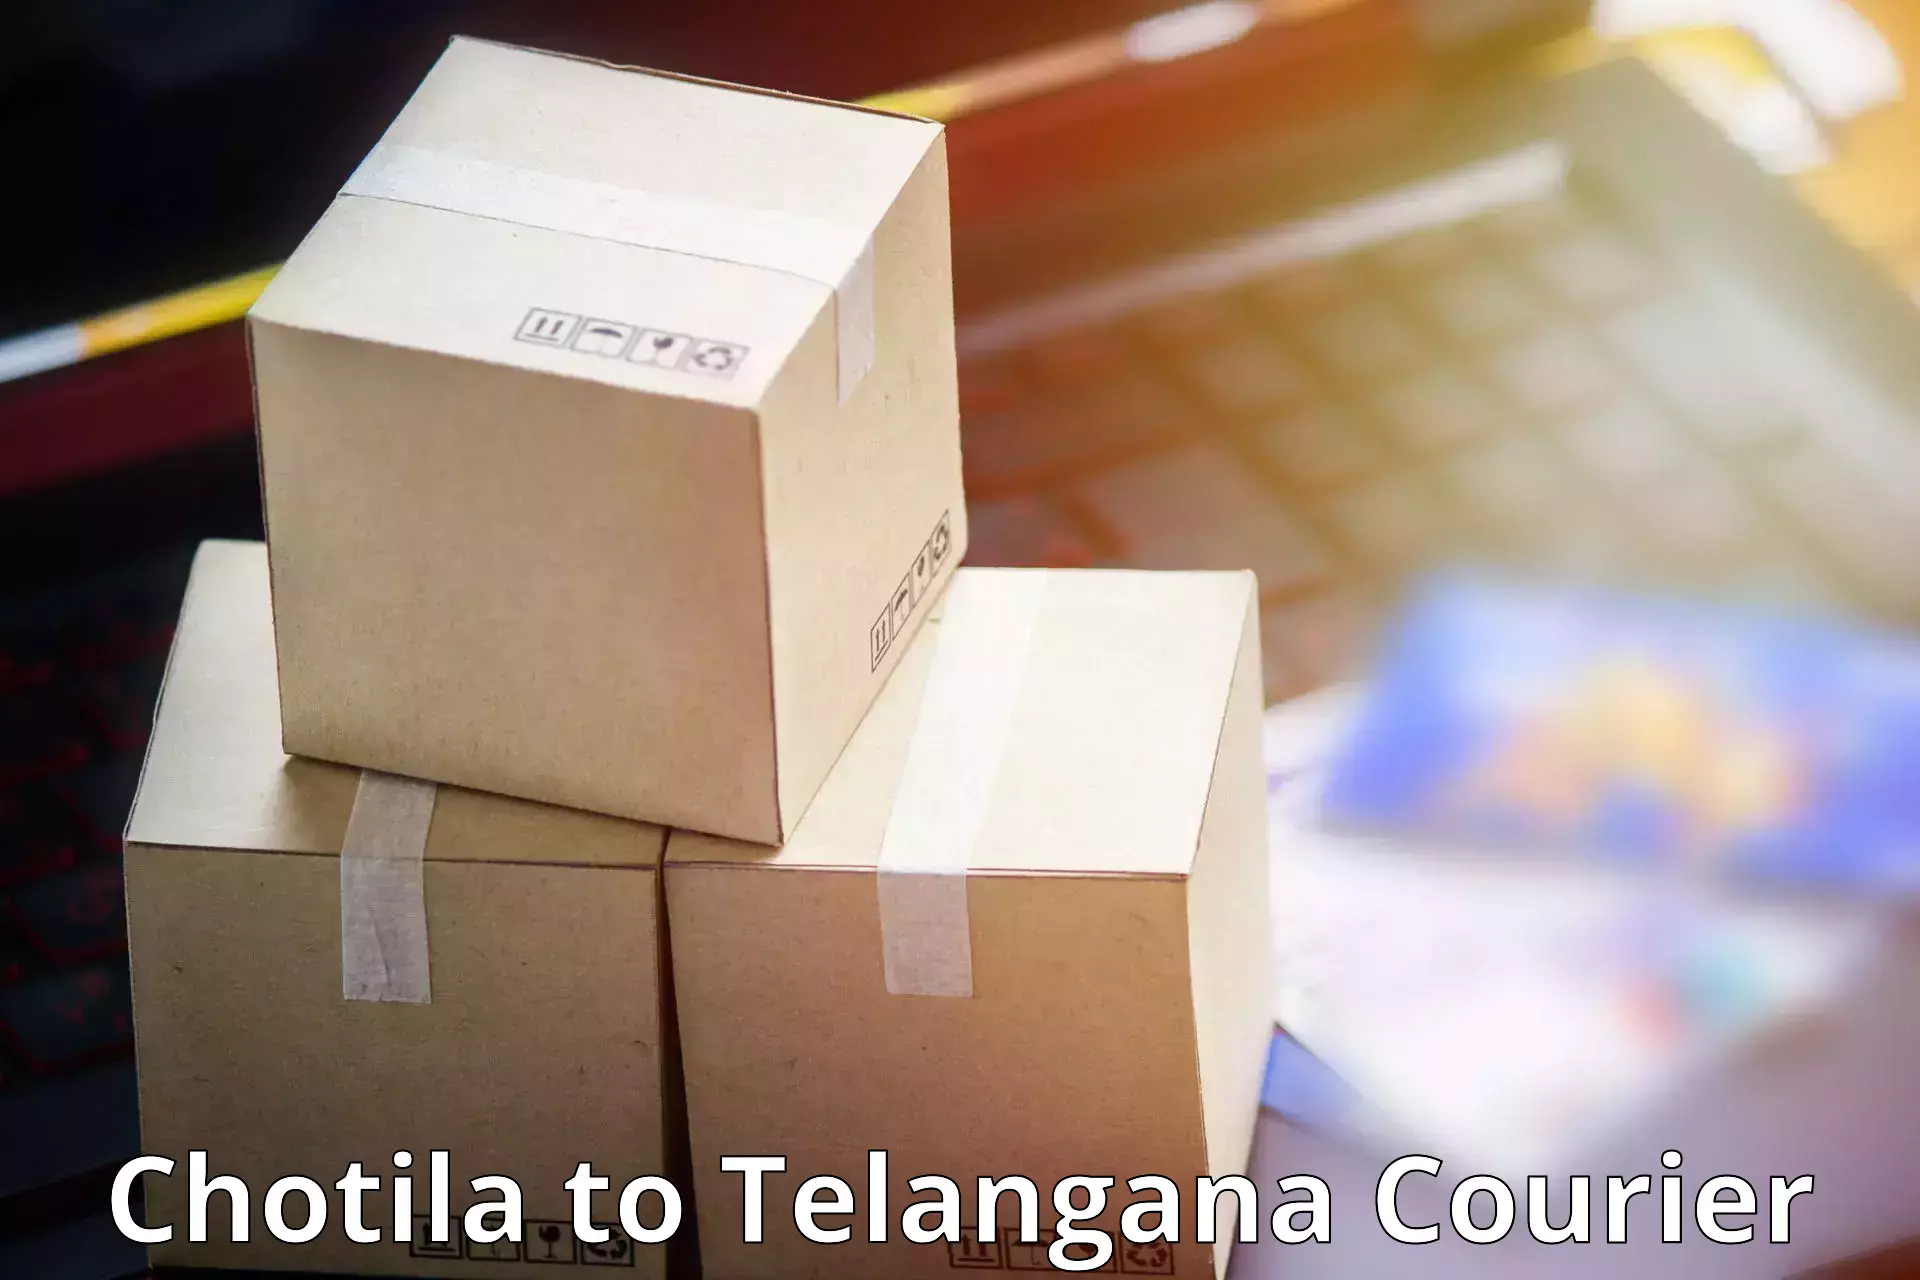 Efficient order fulfillment Chotila to Sultanabad